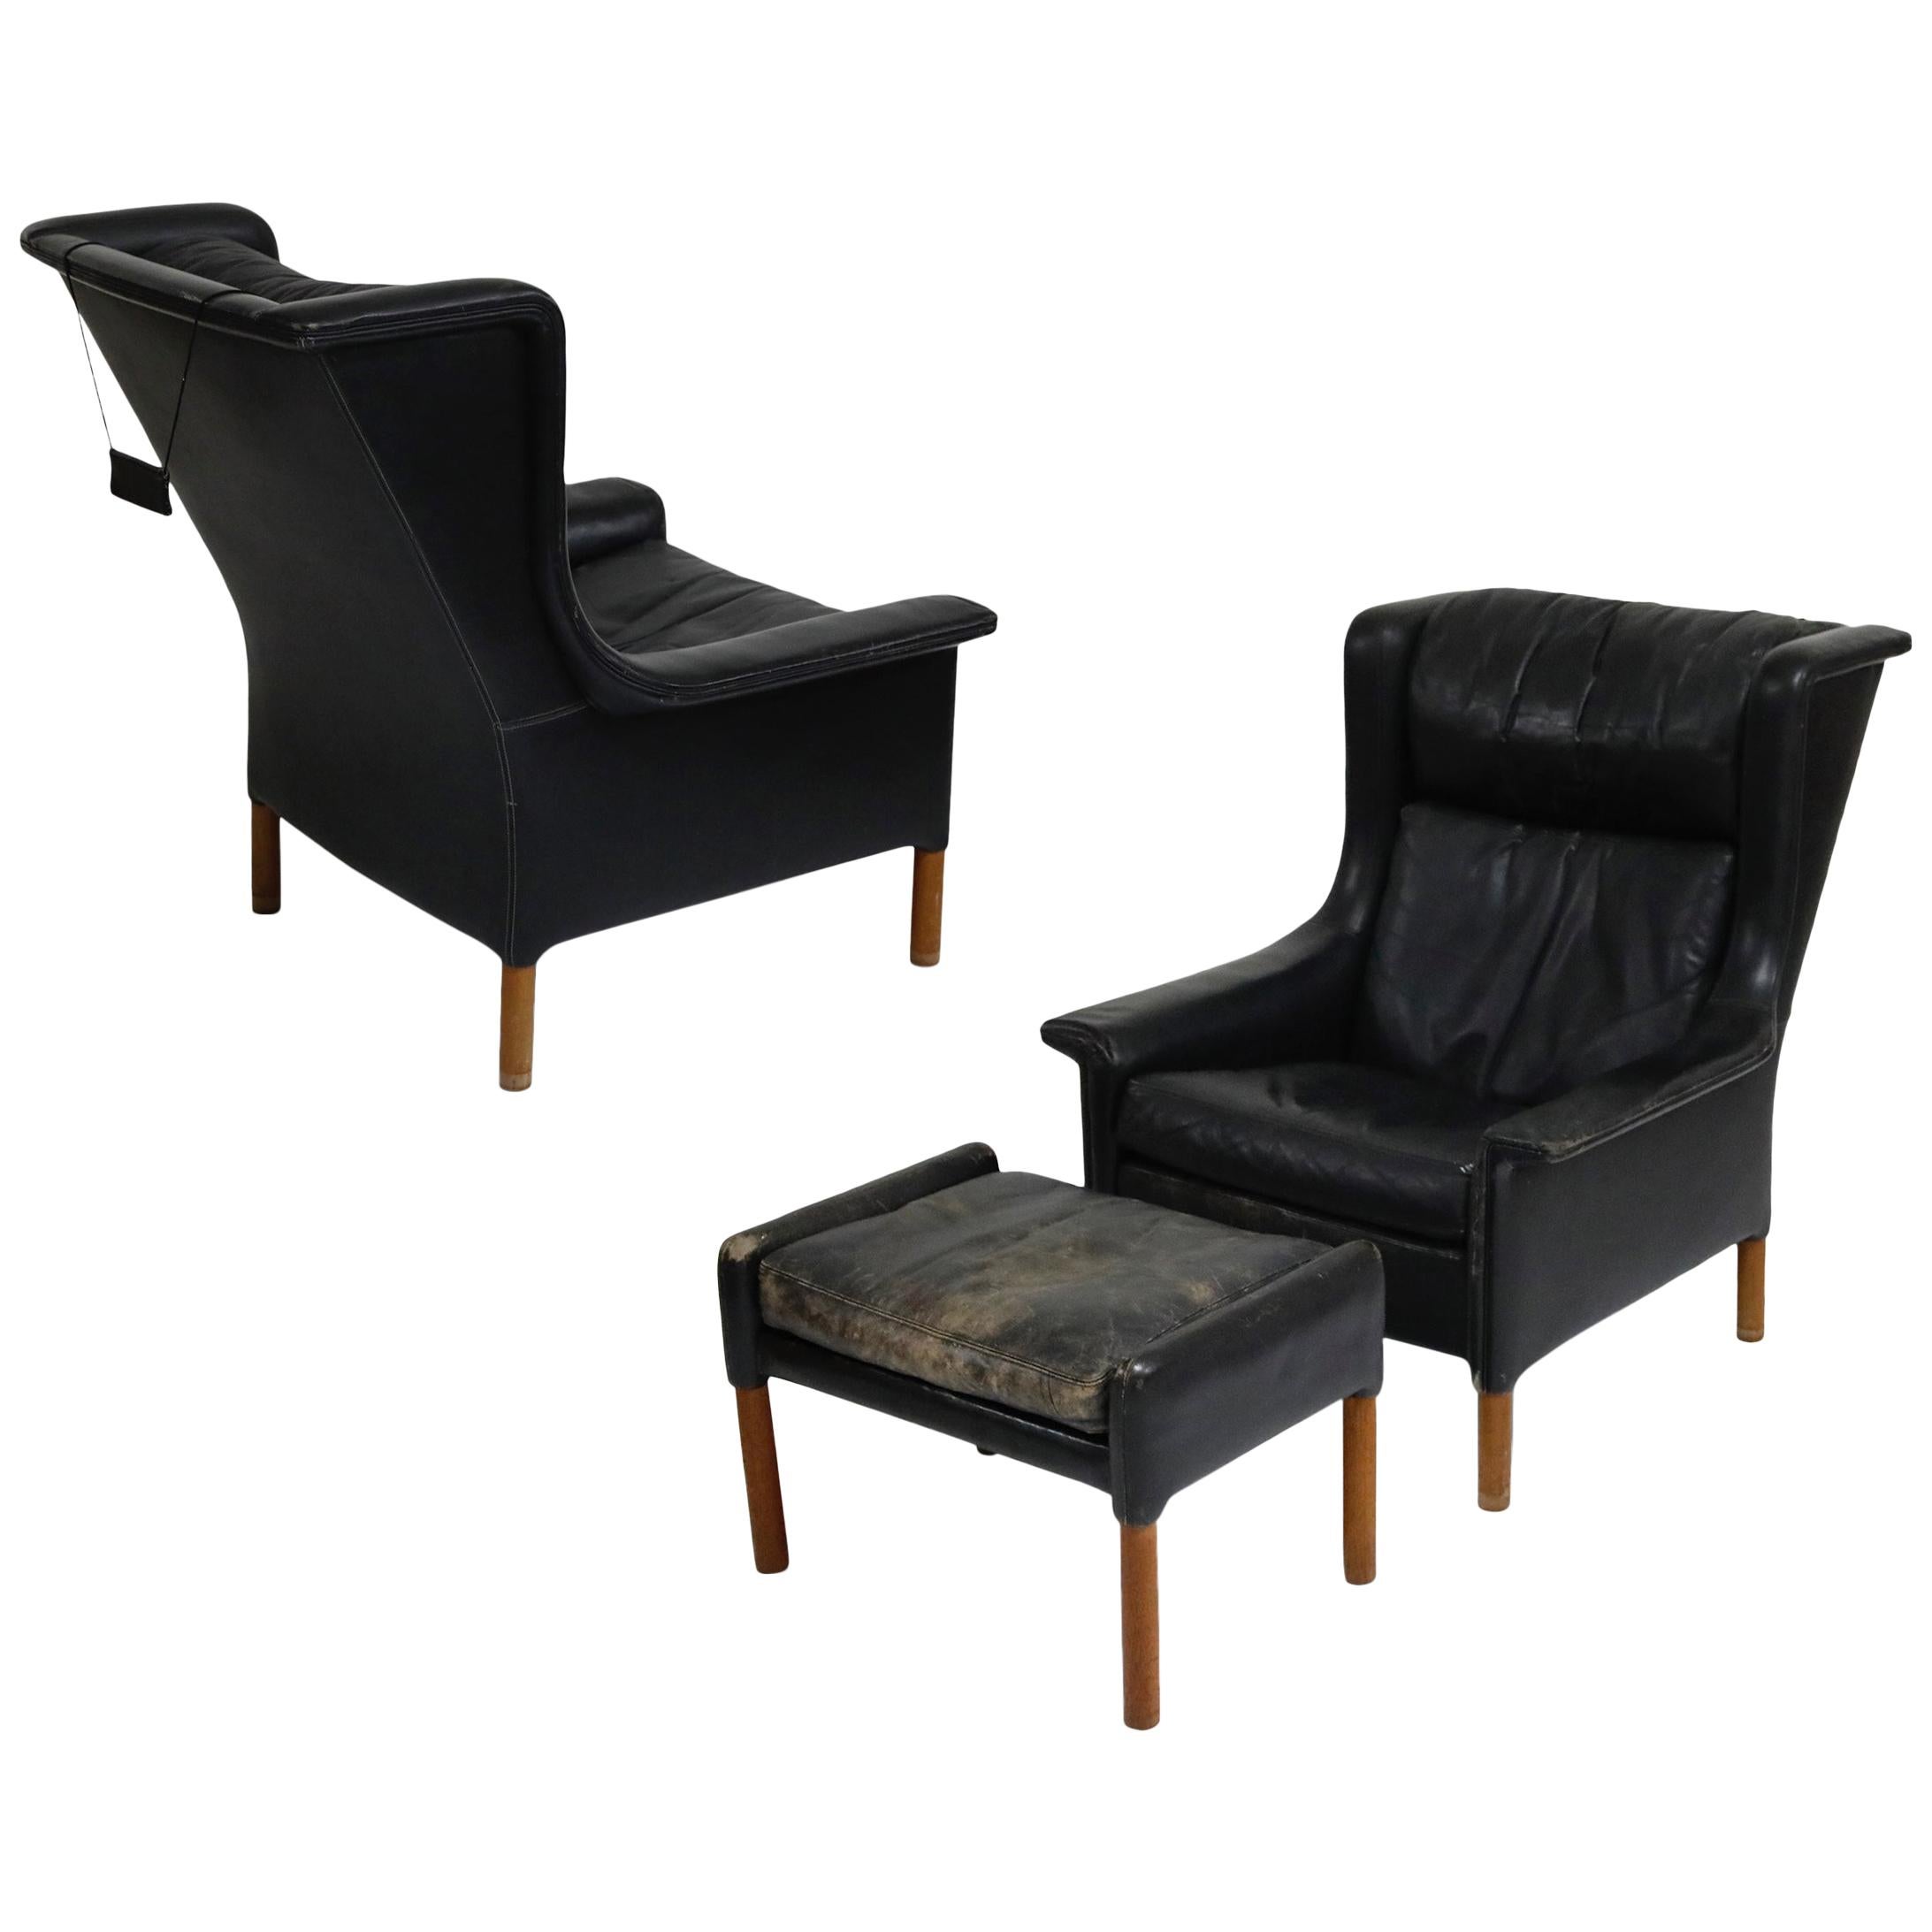 Pair of Black Leather Wingback Chairs and Ottoman by Gerhard Berg, 1965